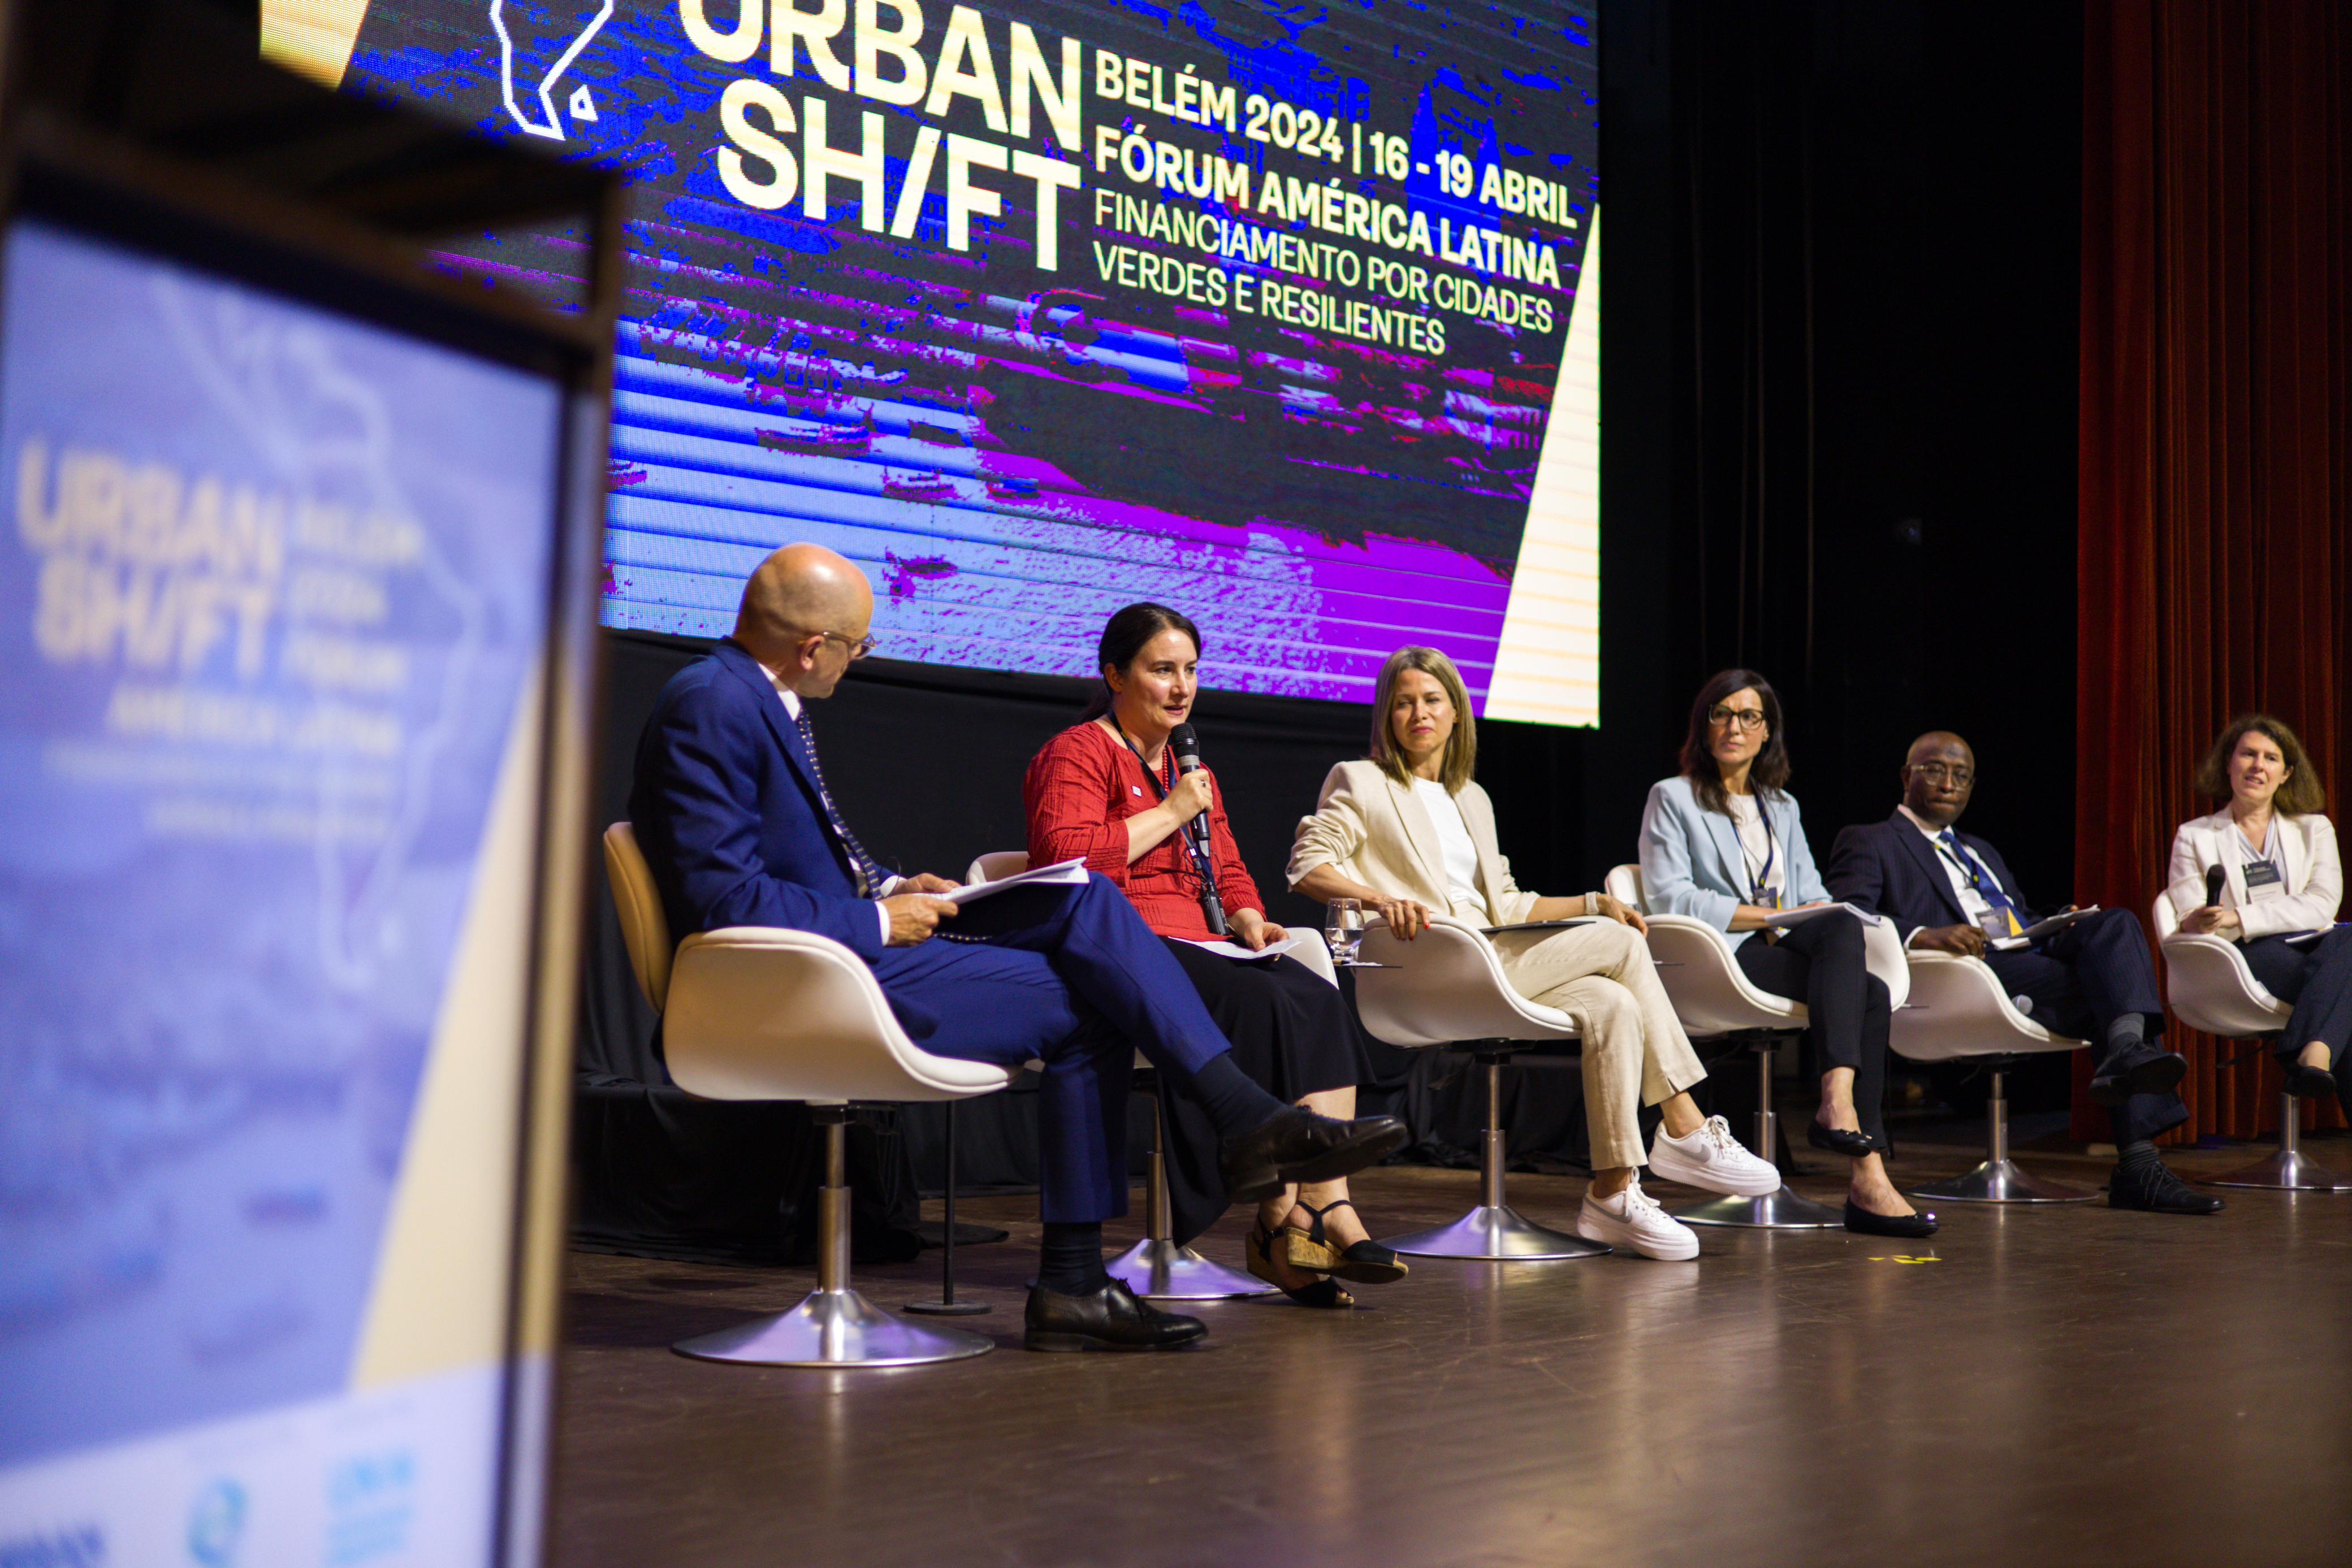 panel discussion during the urbanshift forum